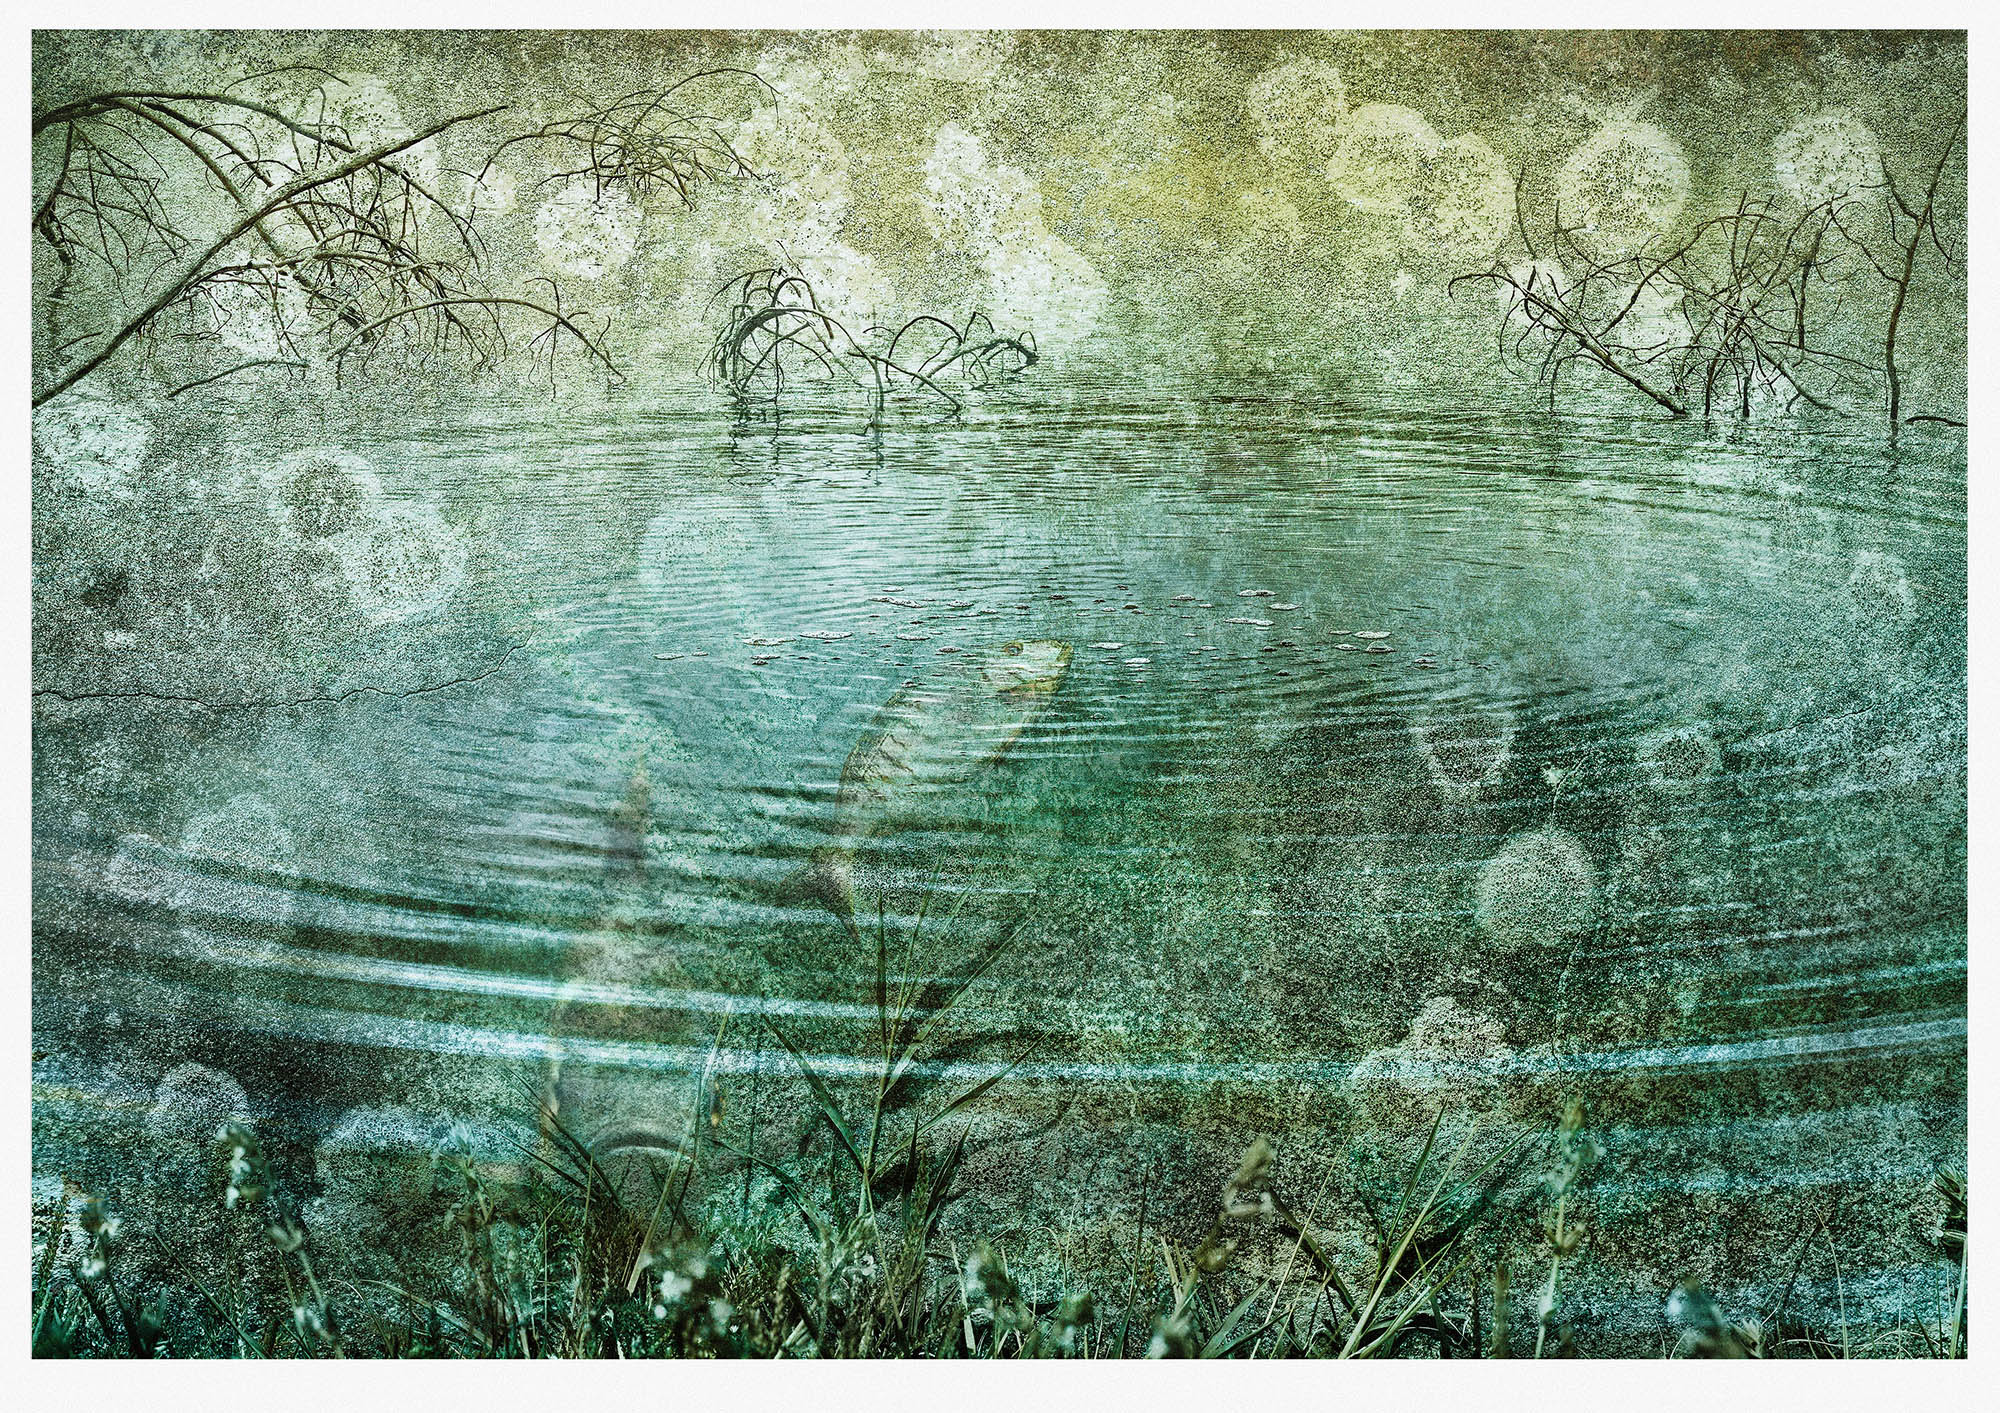 Monotoned misty pond scene with fish surfacing constructed from lichen stained wall and actual pond photographs 